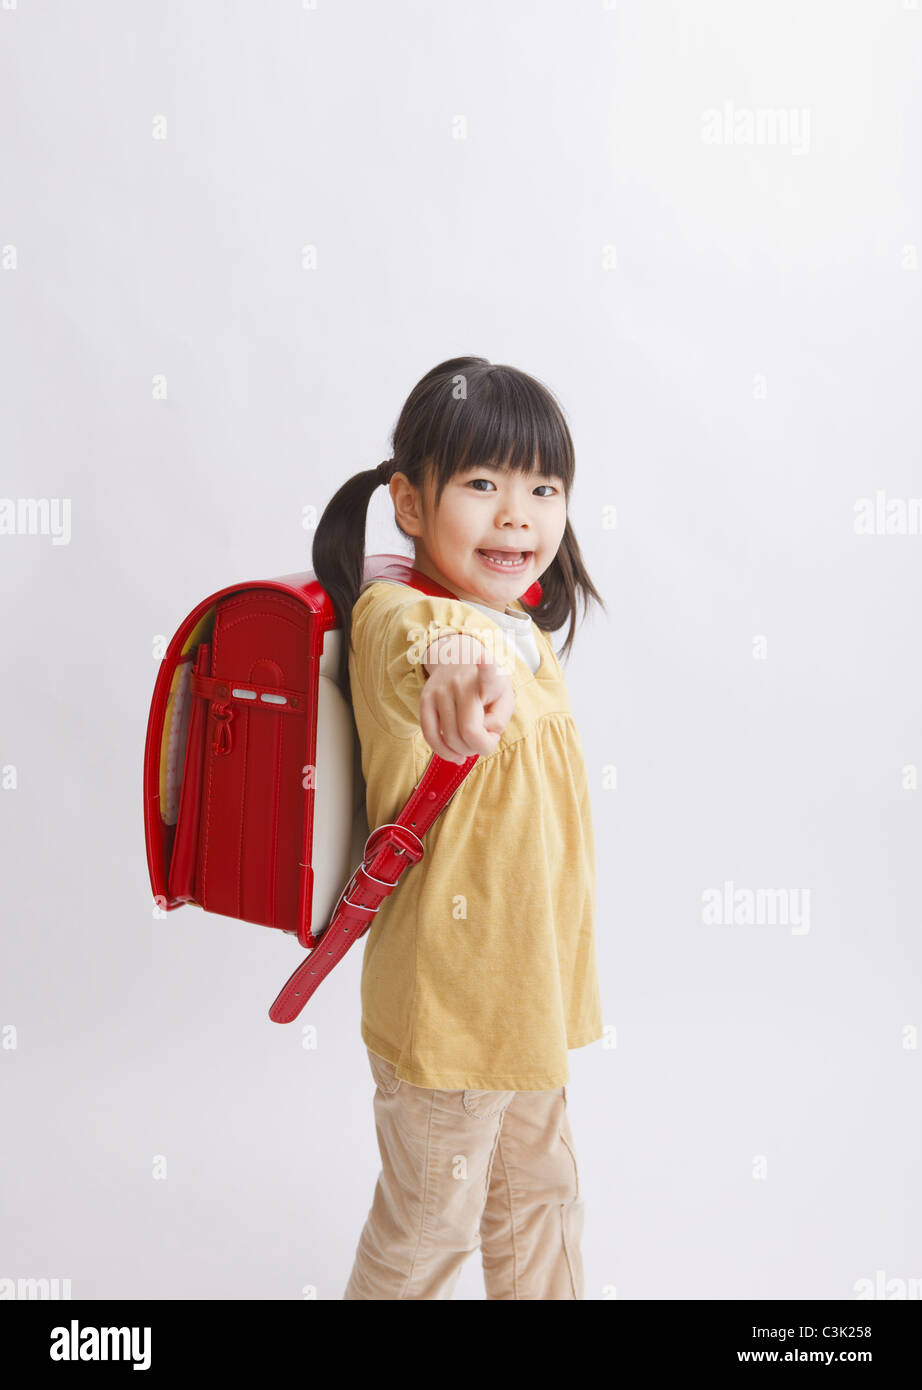 Girl with school bag pointing Stock Photo